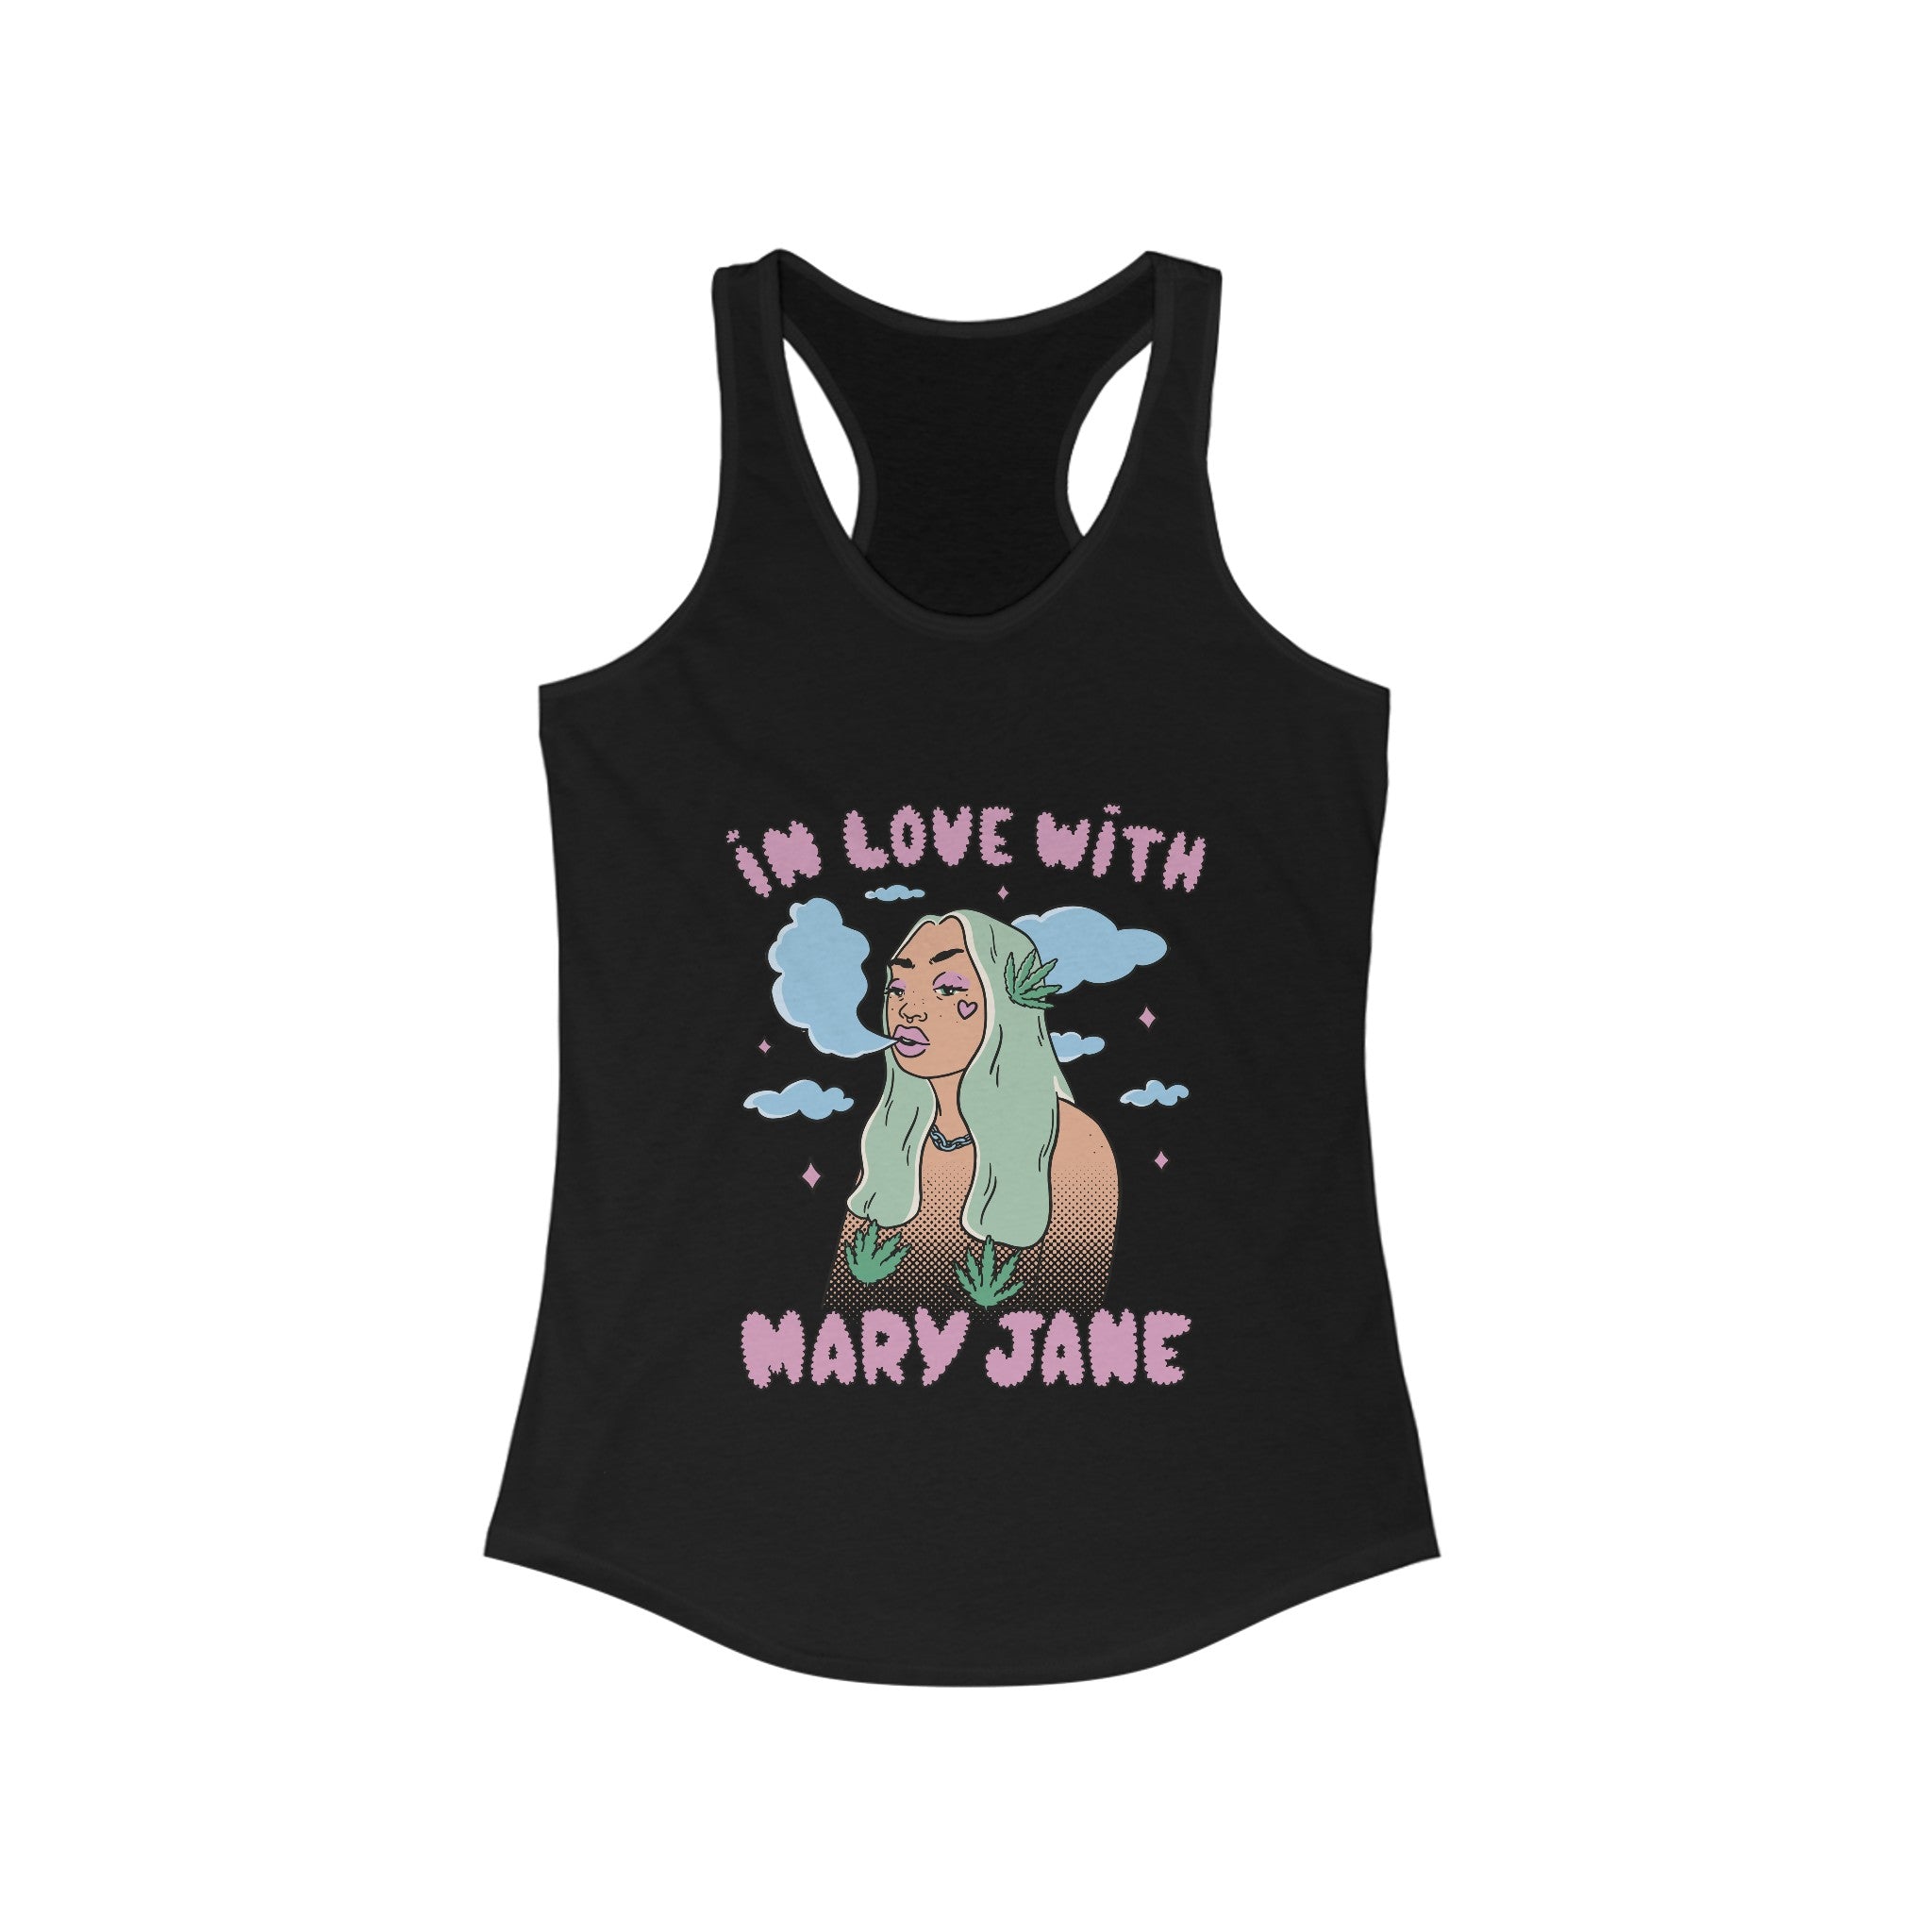 In Love with Mary Jane” Graphic Tank Top - TRU2 Clothing